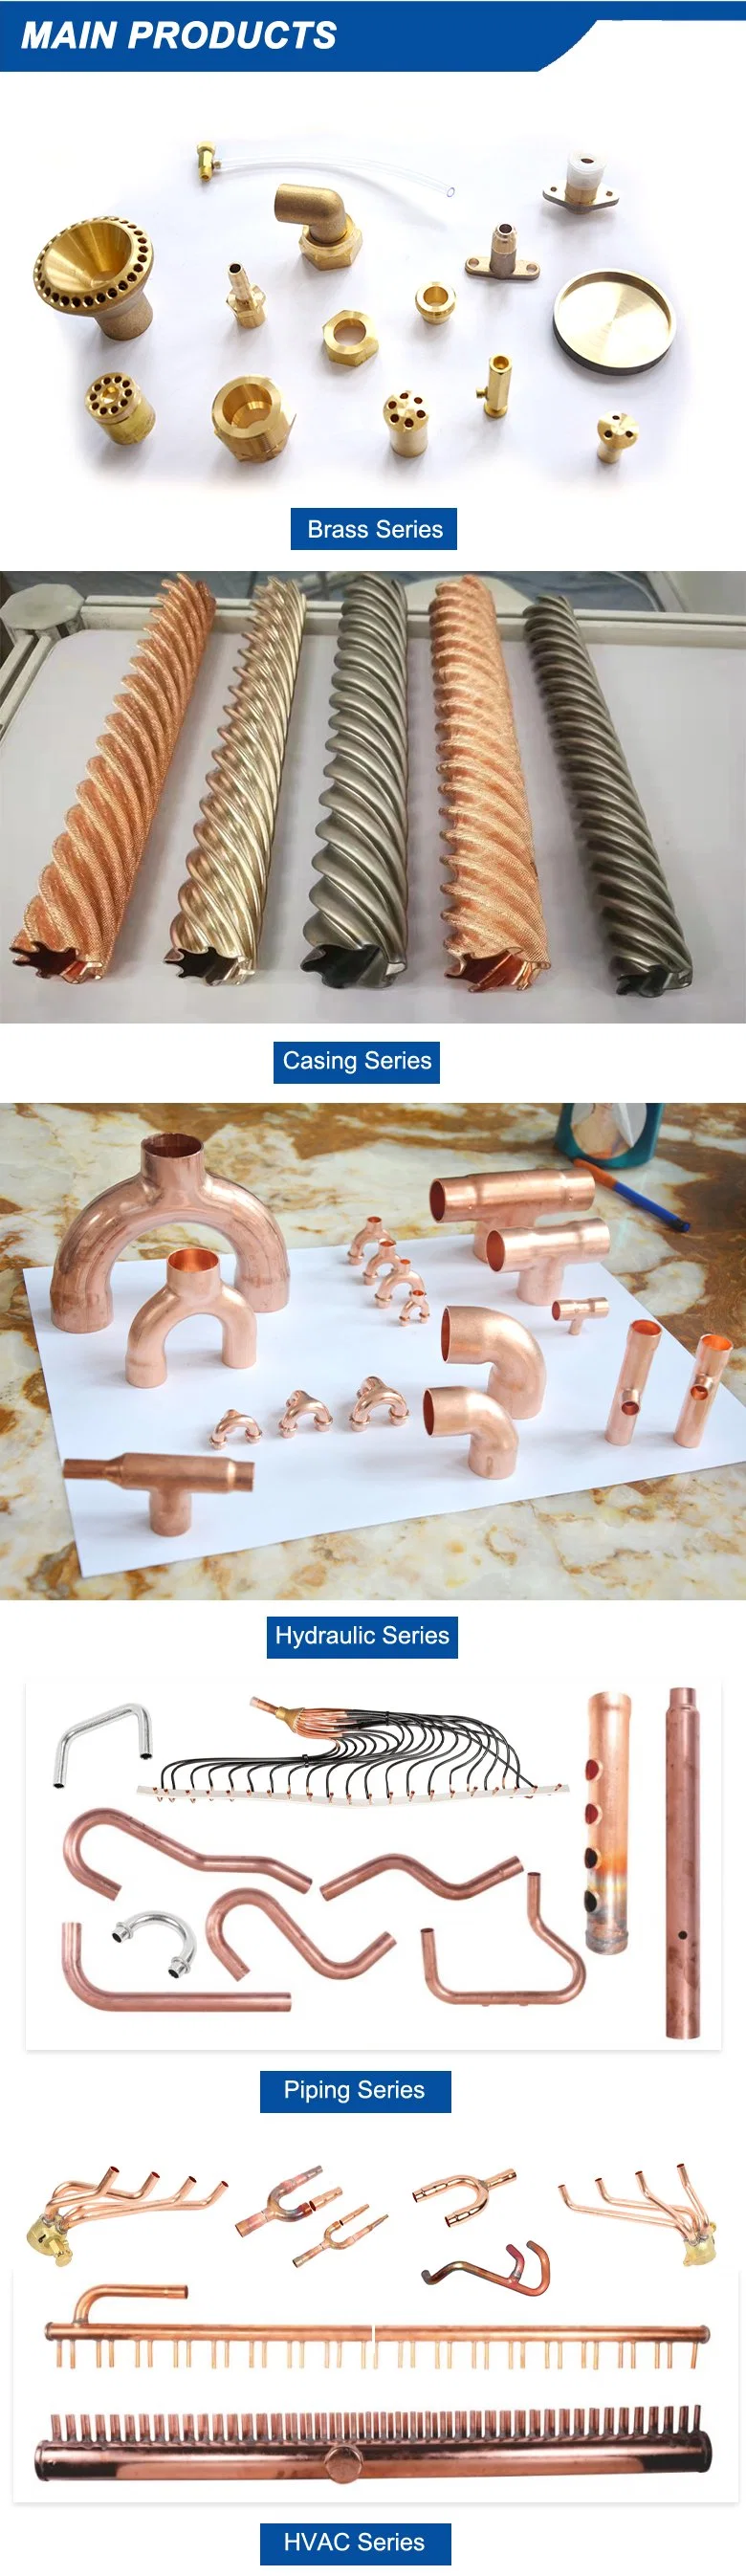 High Quality Central Air Conditioning/Vrv Refrigeration Parts/Branch Pipe/Copper Fittings